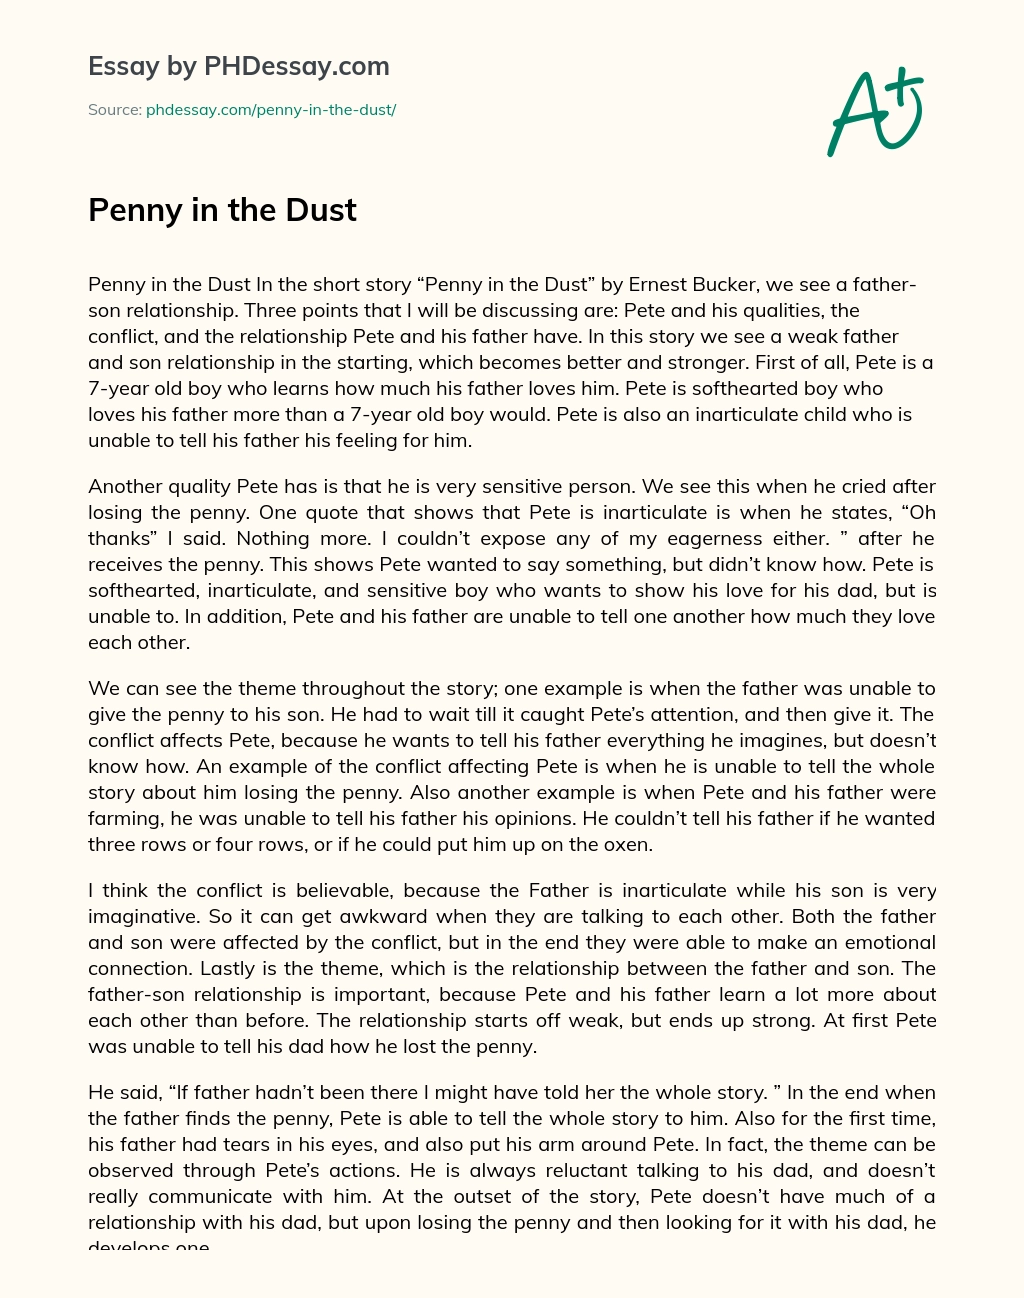 Penny in the Dust essay